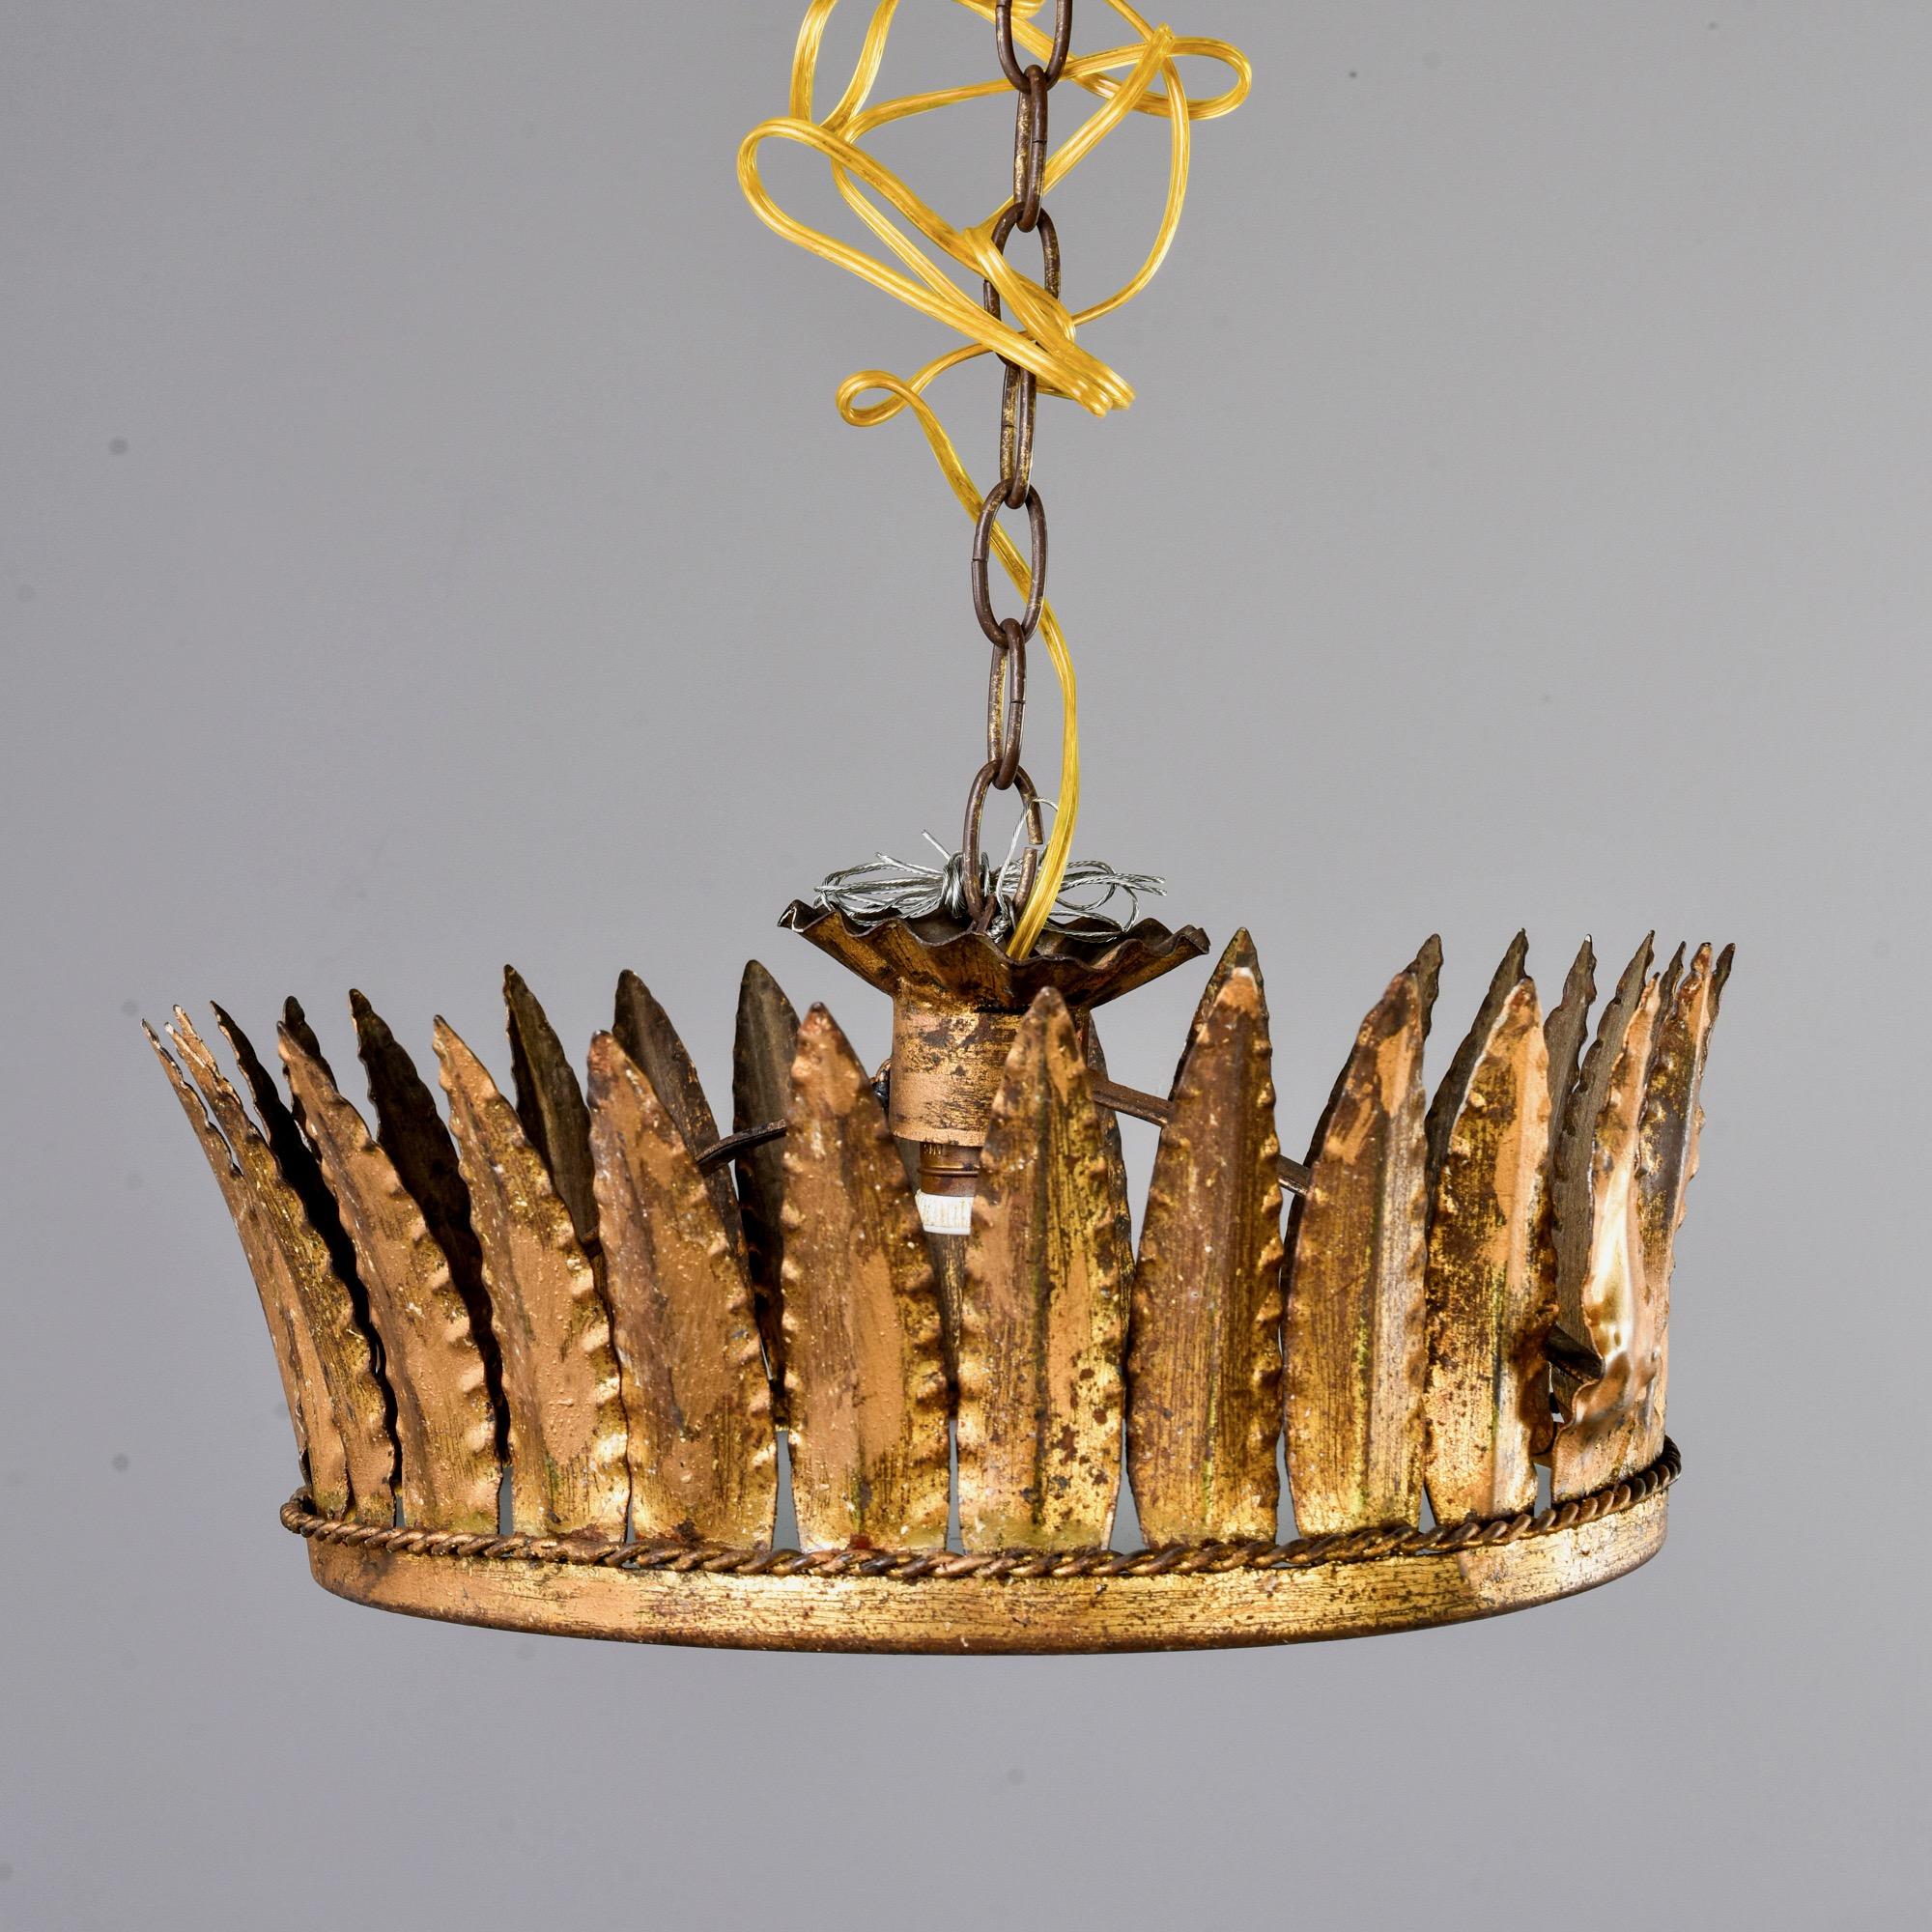 Spanish Gilt Metal Crown Ceiling Fixture In Good Condition For Sale In Troy, MI